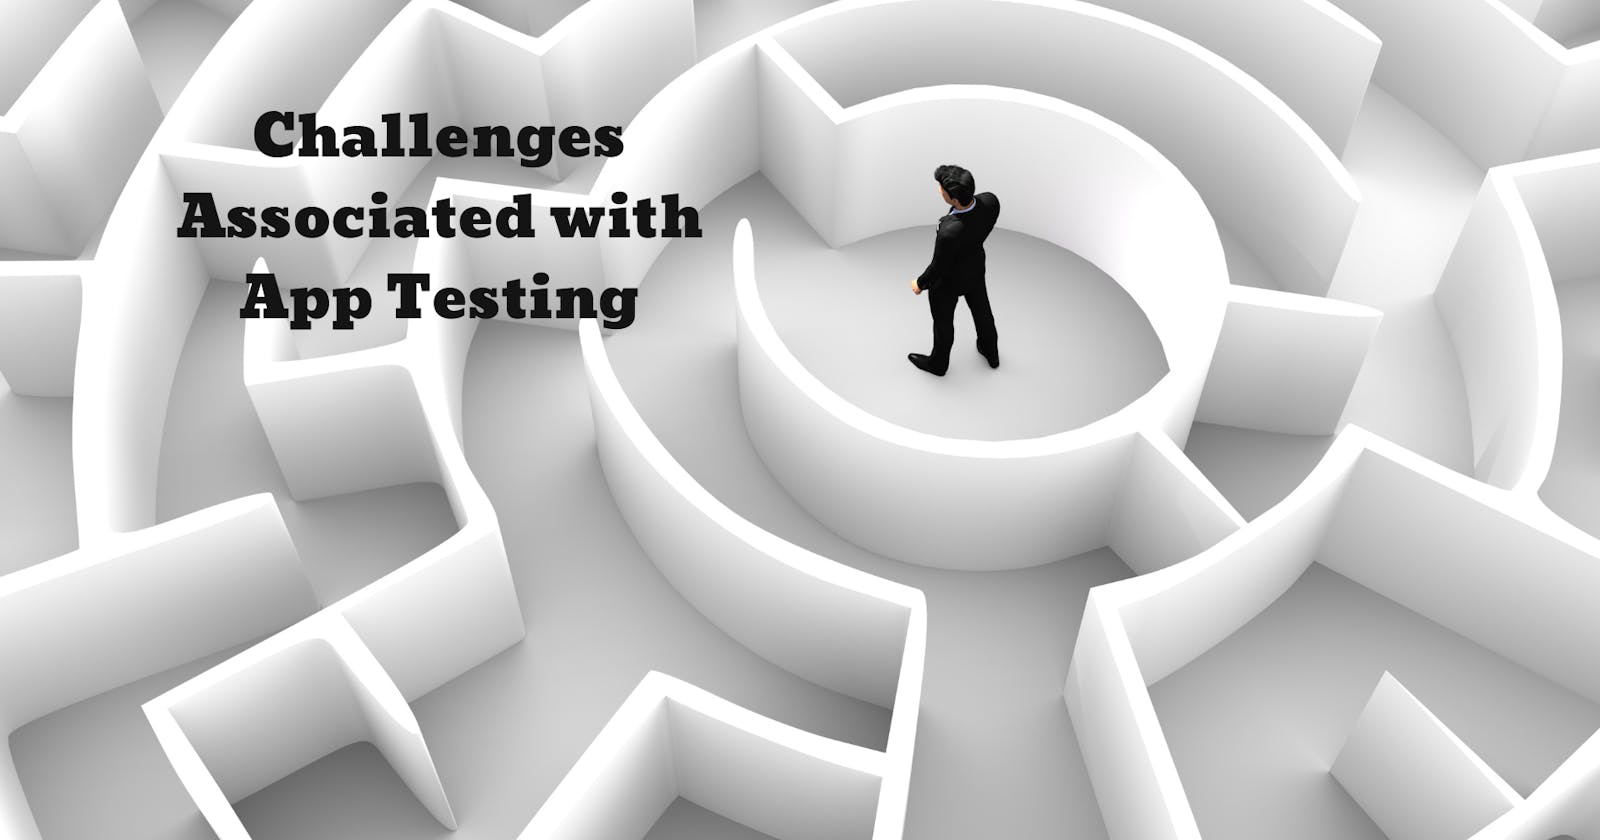 Challenges Associated with App Testing